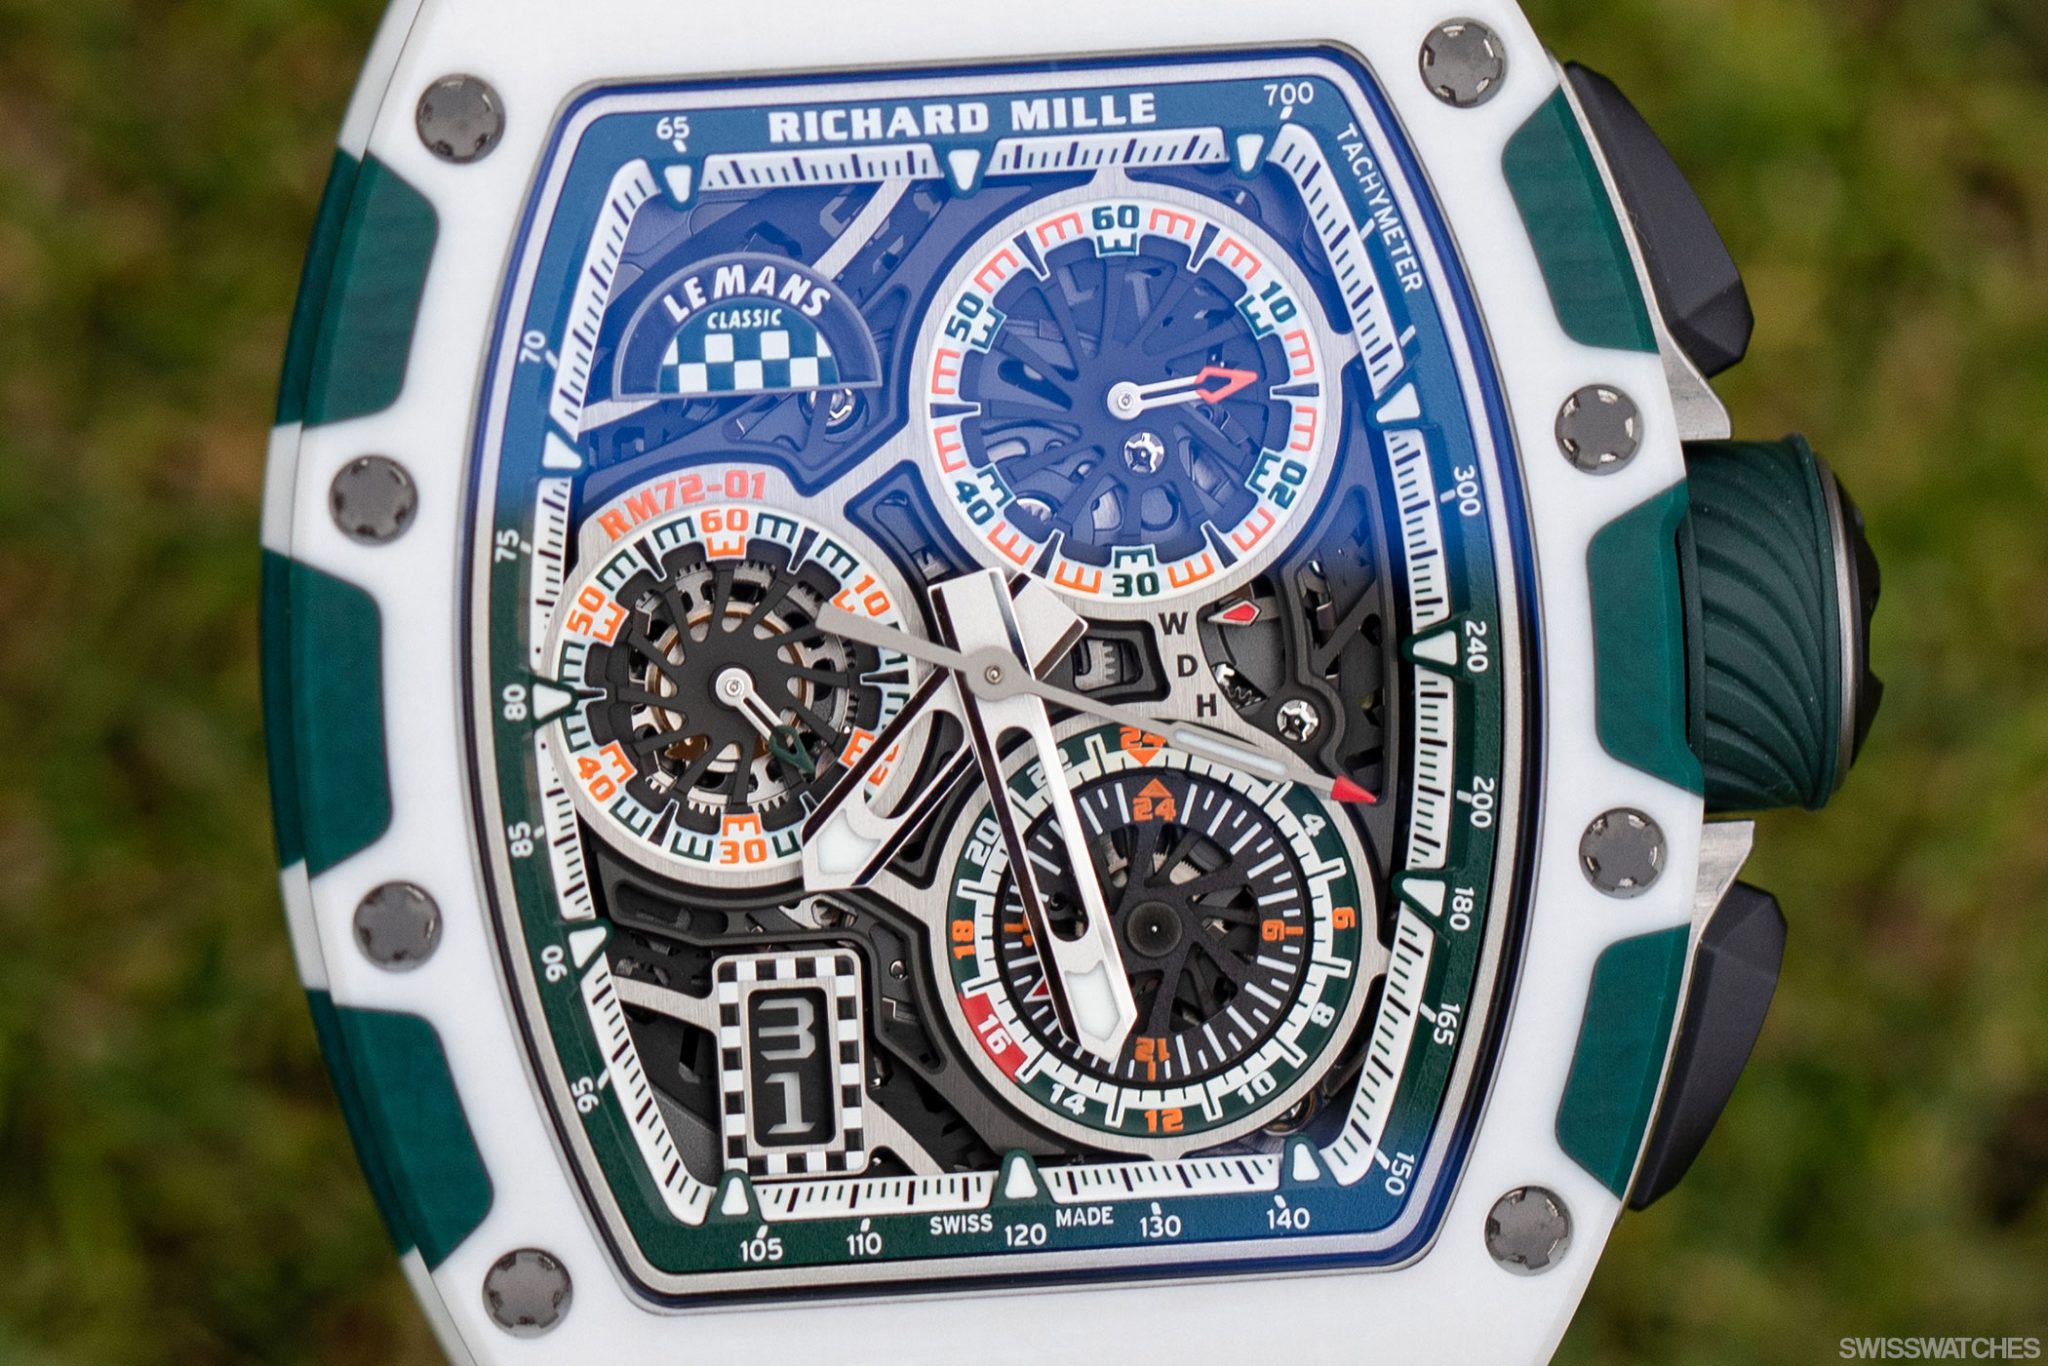 Richard-Mille-RM-72-01-LeMans-Classic-Limited-Edition-of-150-Pieces-Dial